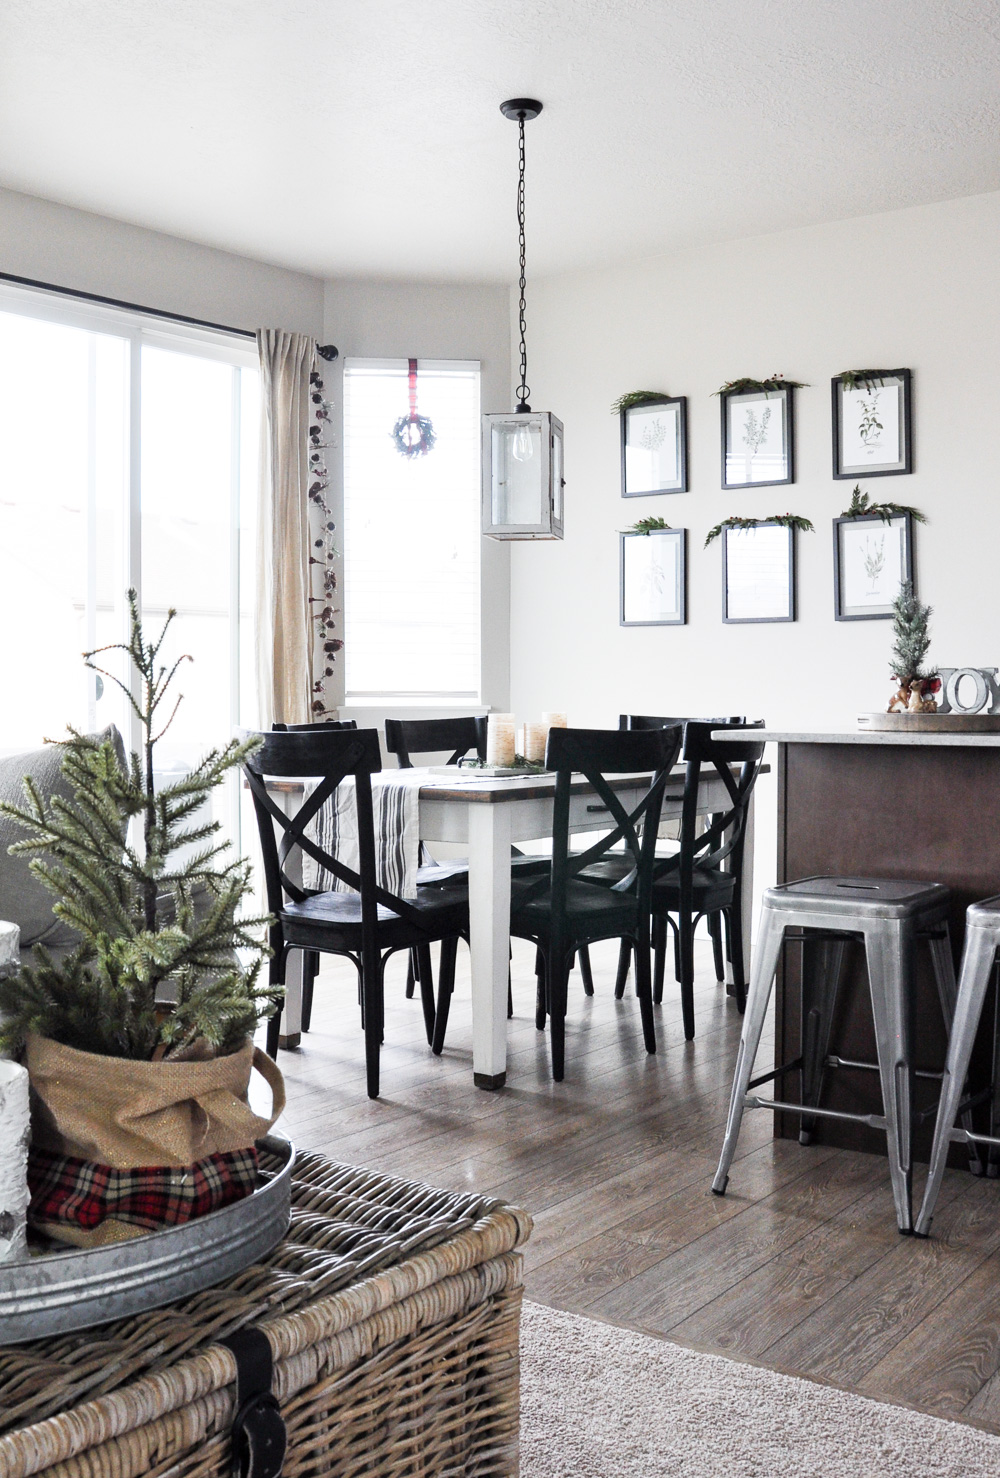 Come take a tour of this Christmas Kitchen & Dining Room along with 25 other bloggers! Simple touches are all thats needed to bring Christmas into your home